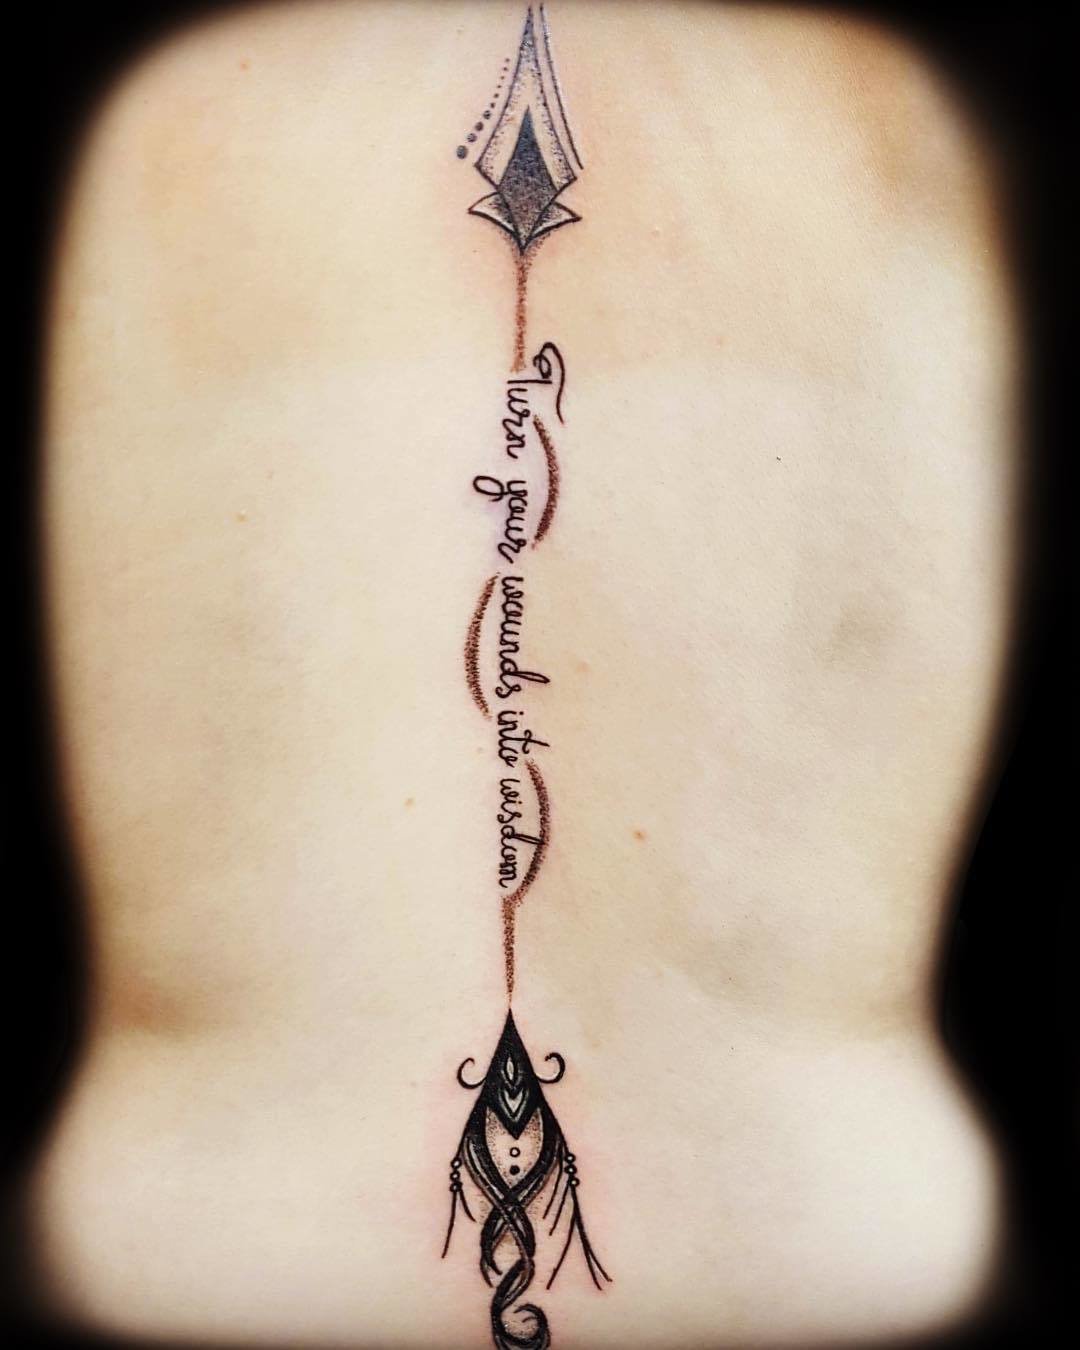 Hey guys Spine tat complete done by Mia Bacchi at Grave Tattoo  rtattoo